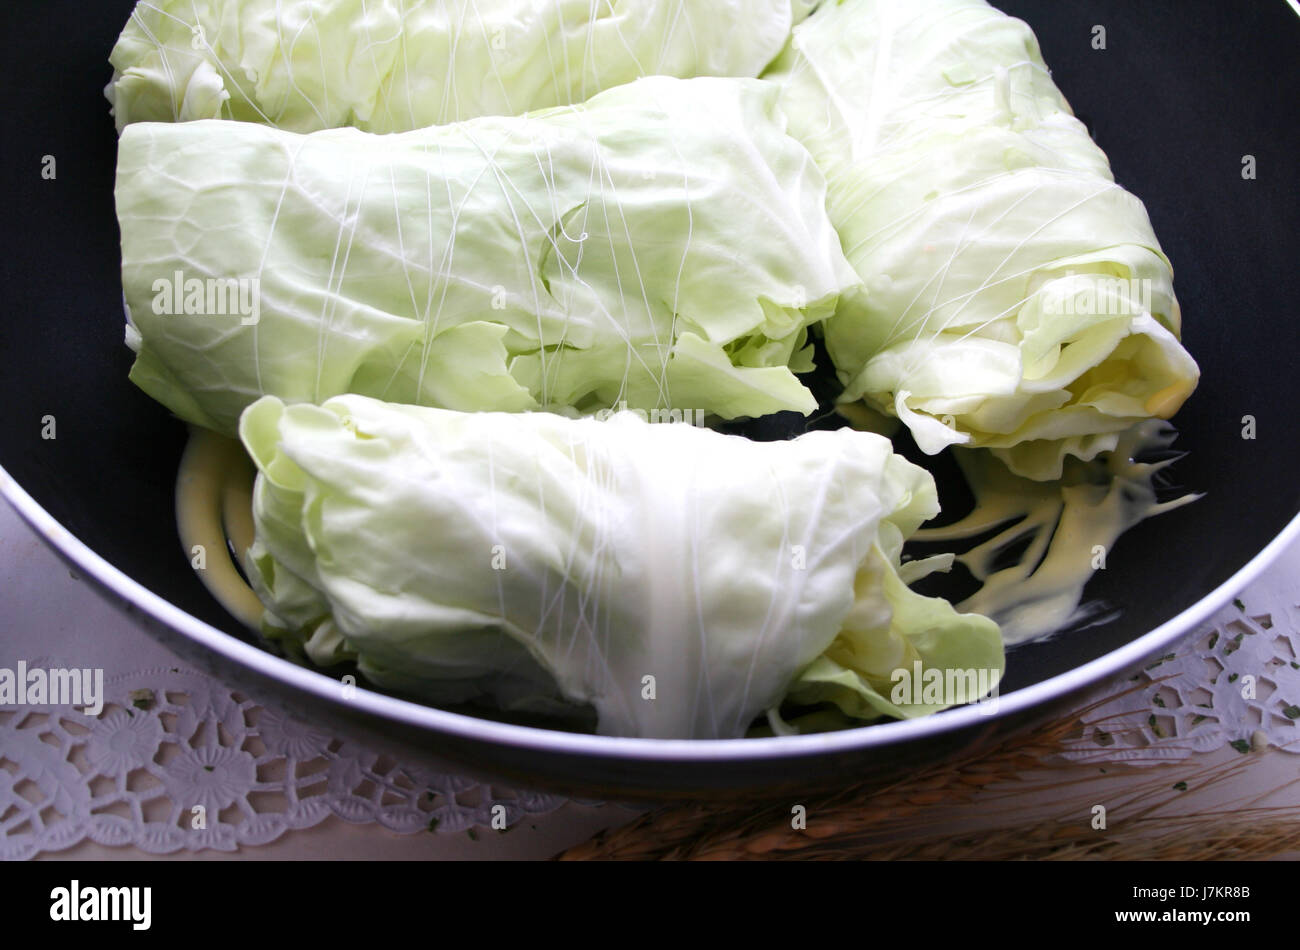 vegetable cabbage food aliment eco dainty vegetable dish meal envelop cabbage Stock Photo